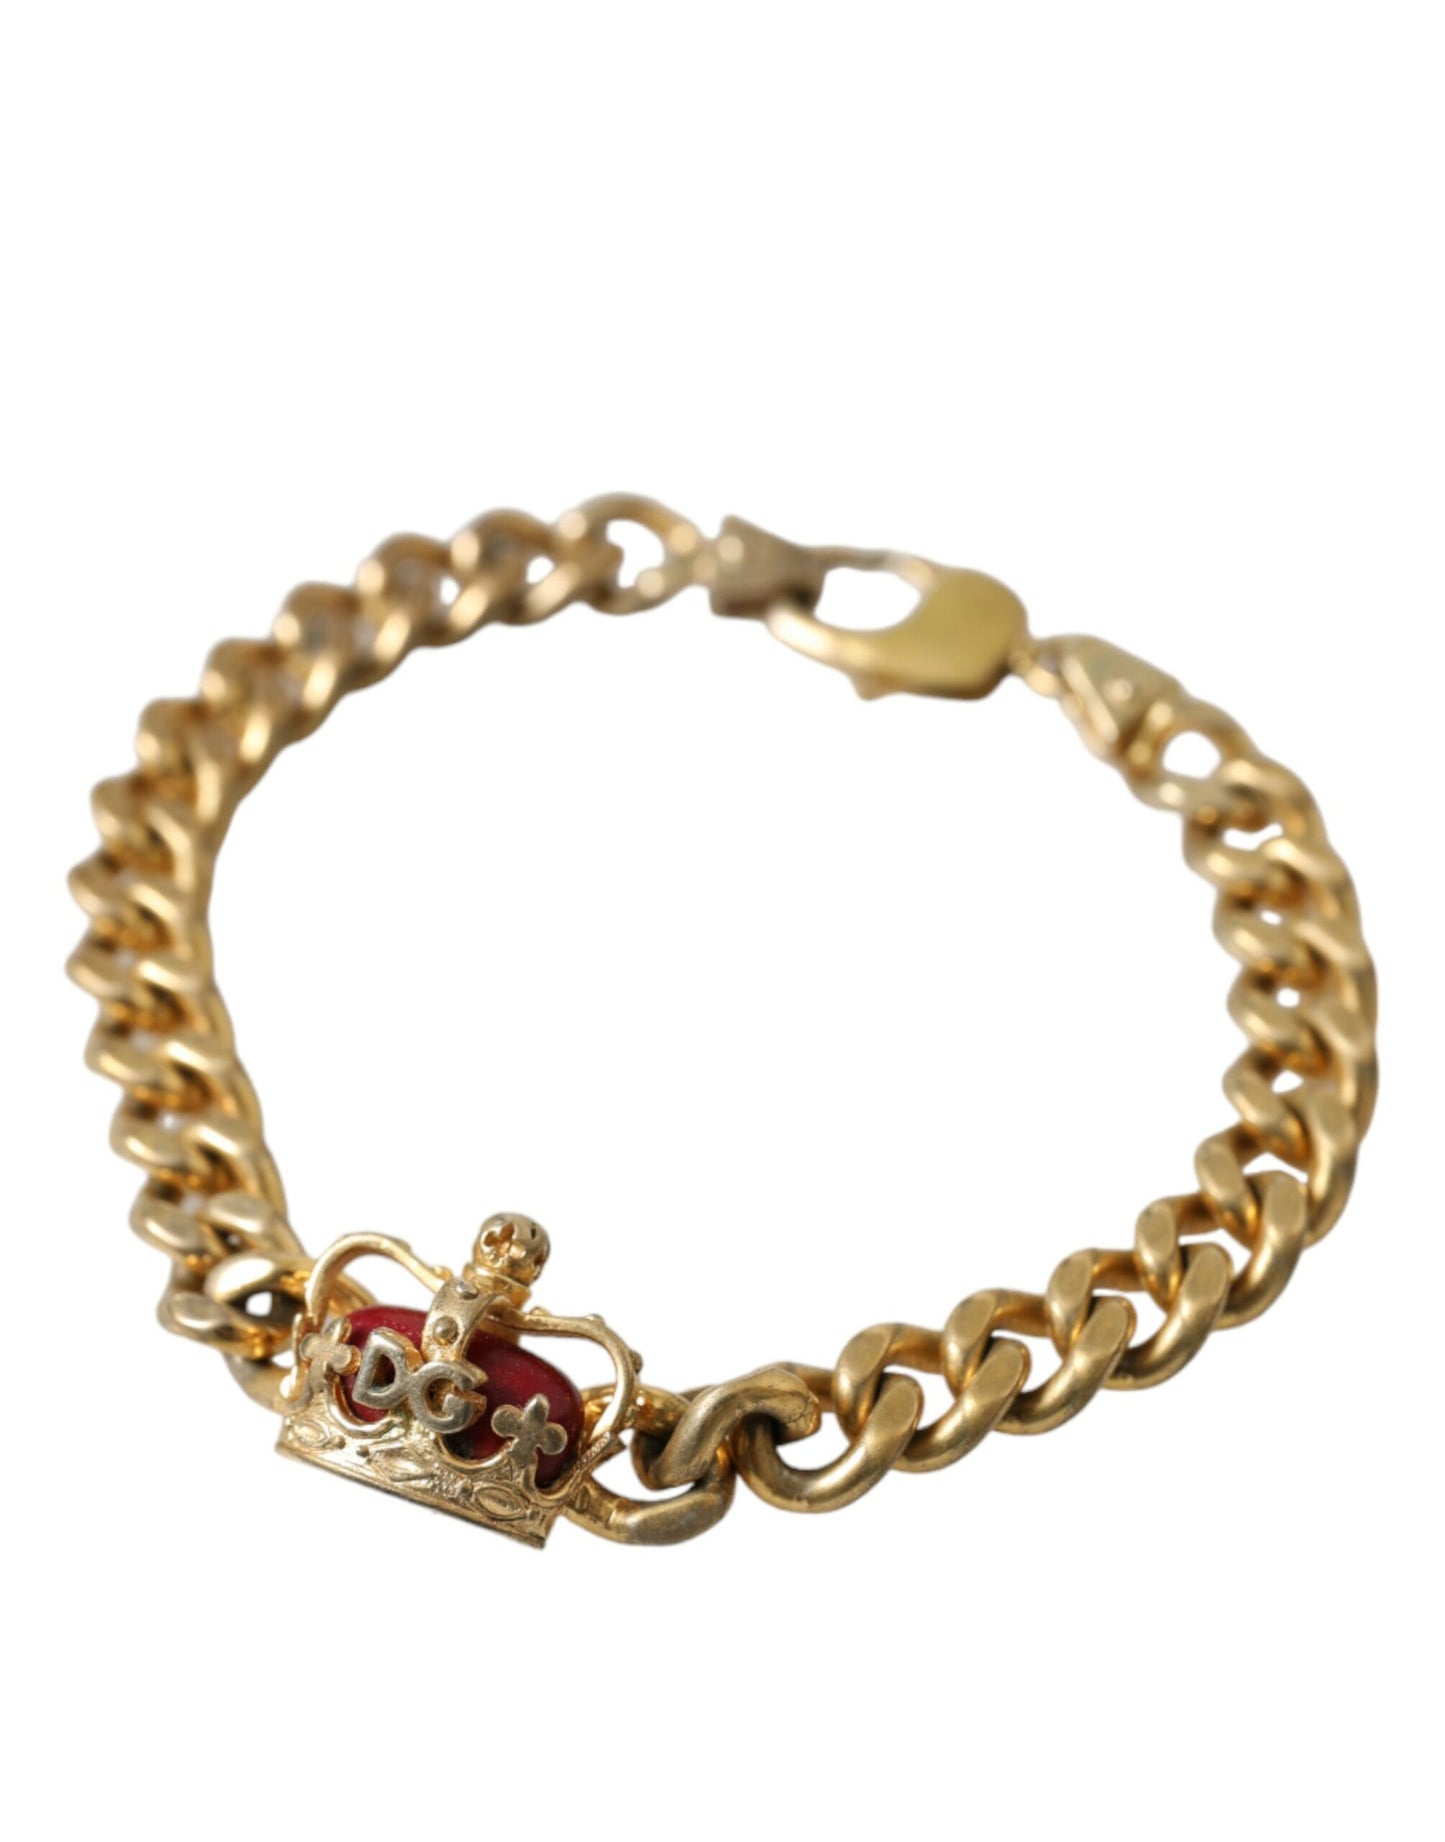 Dolce & Gabbana Opulent Gold-Tone Chain Bracelet with Red Accents